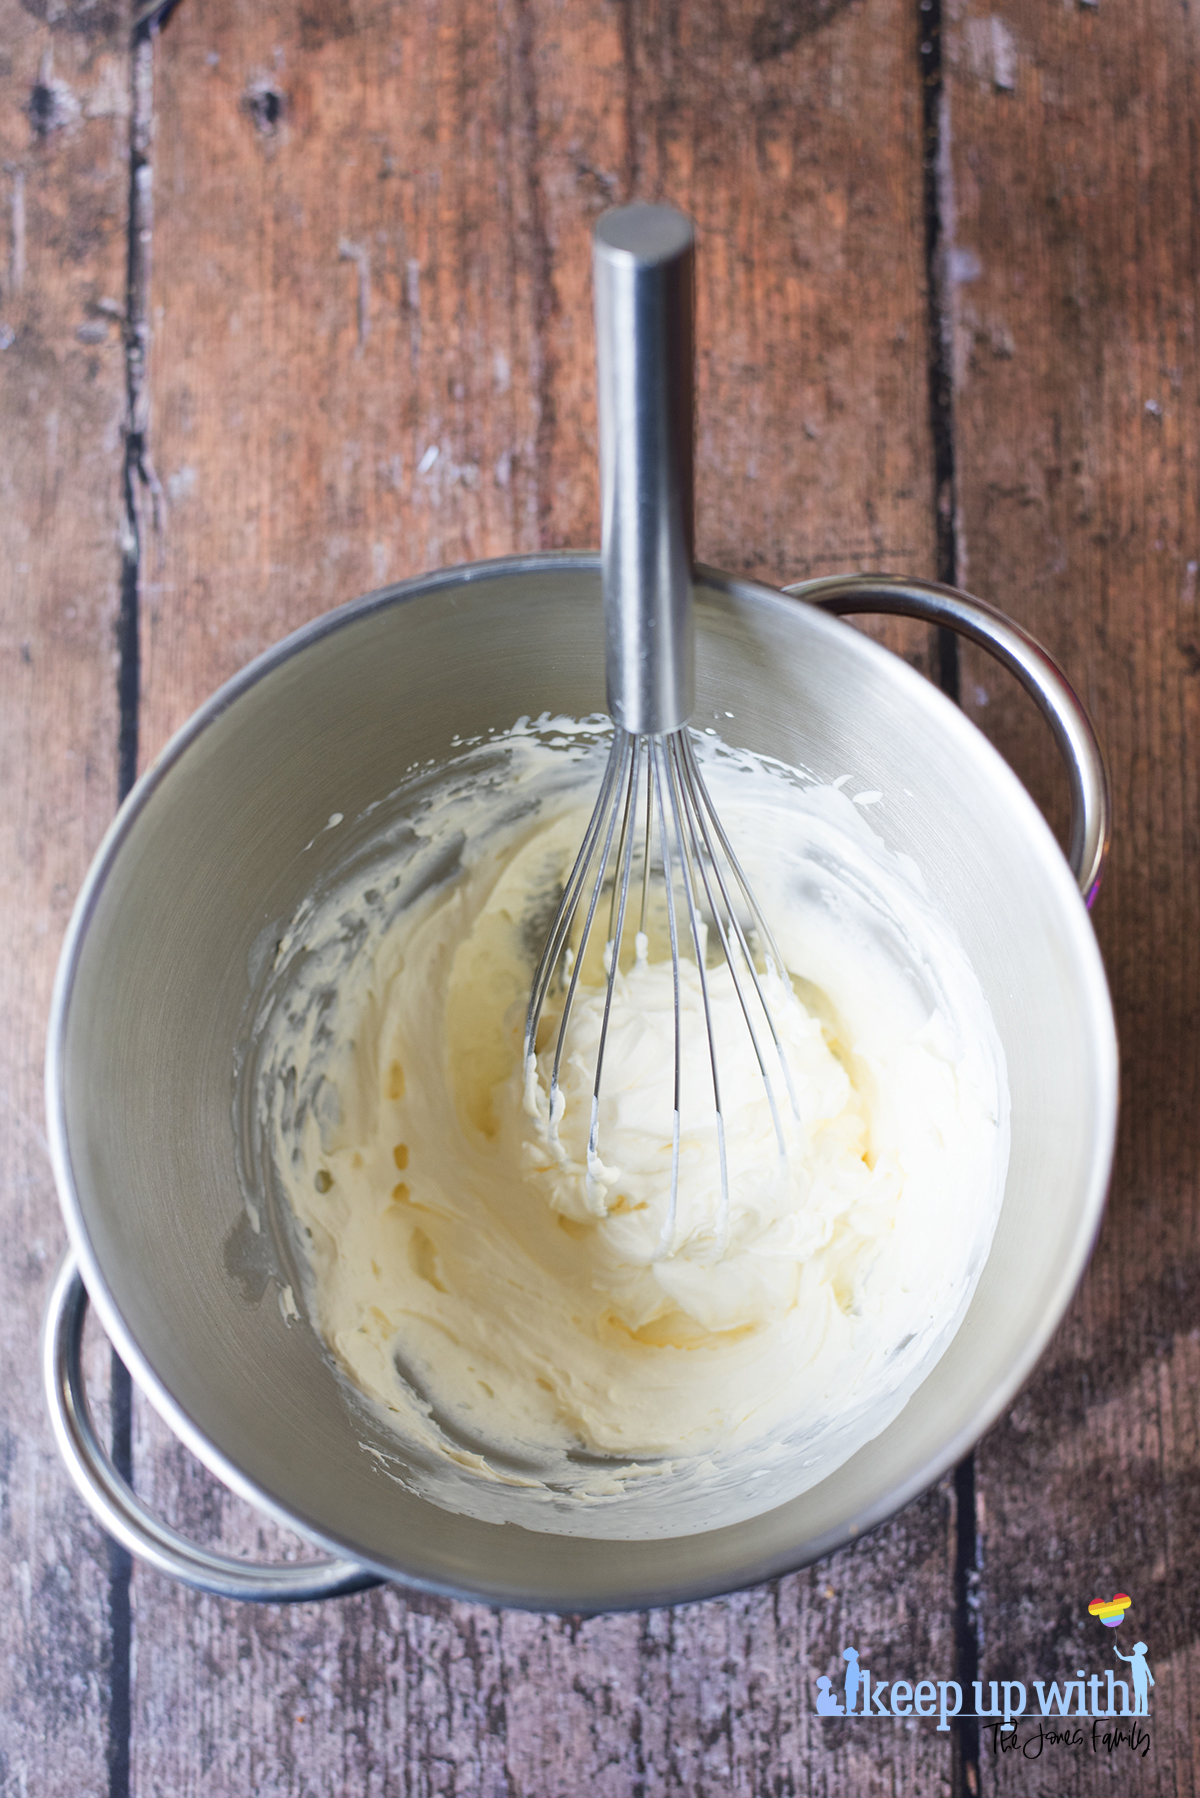 Image shows a silver mixing bowl of whipping cream ready for use, with a cream covered whisk in the bowl, on a dark wooden tabletop. Image by Sara-Jayne Jones of Keep Up With The Jones Family.